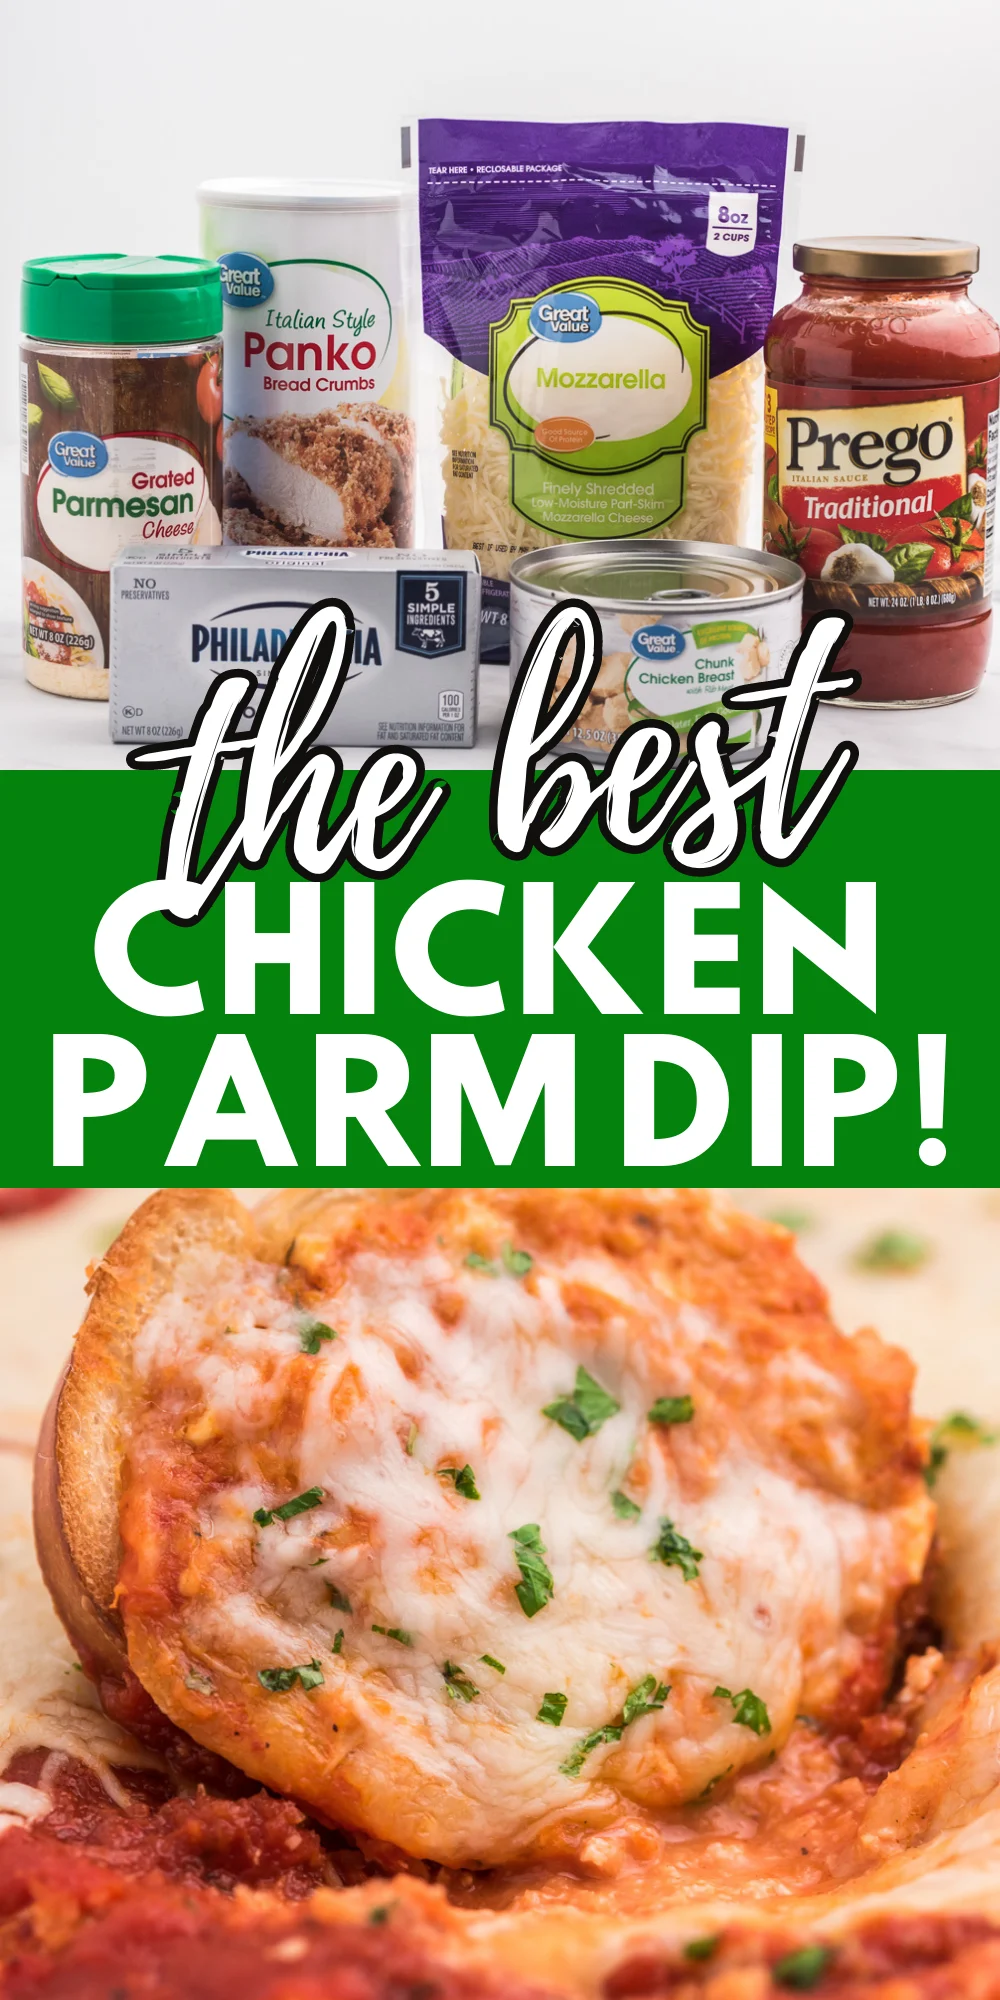 Easy Chicken Parmesan Dip made with canned chicken, cream cheese, parmesan cheese, panko crumbs. 